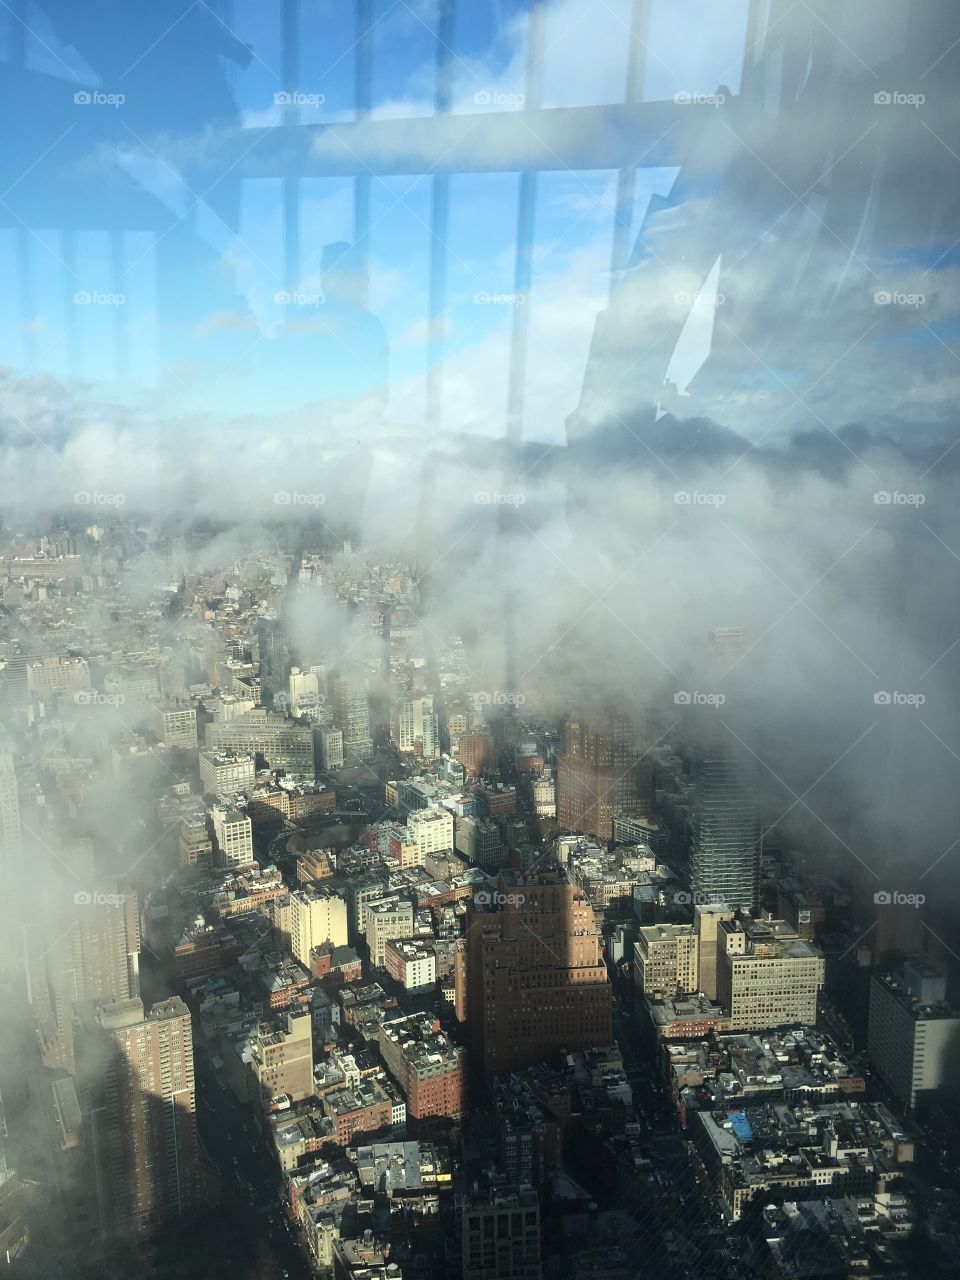 Shadow of One World Trade Center in New York City